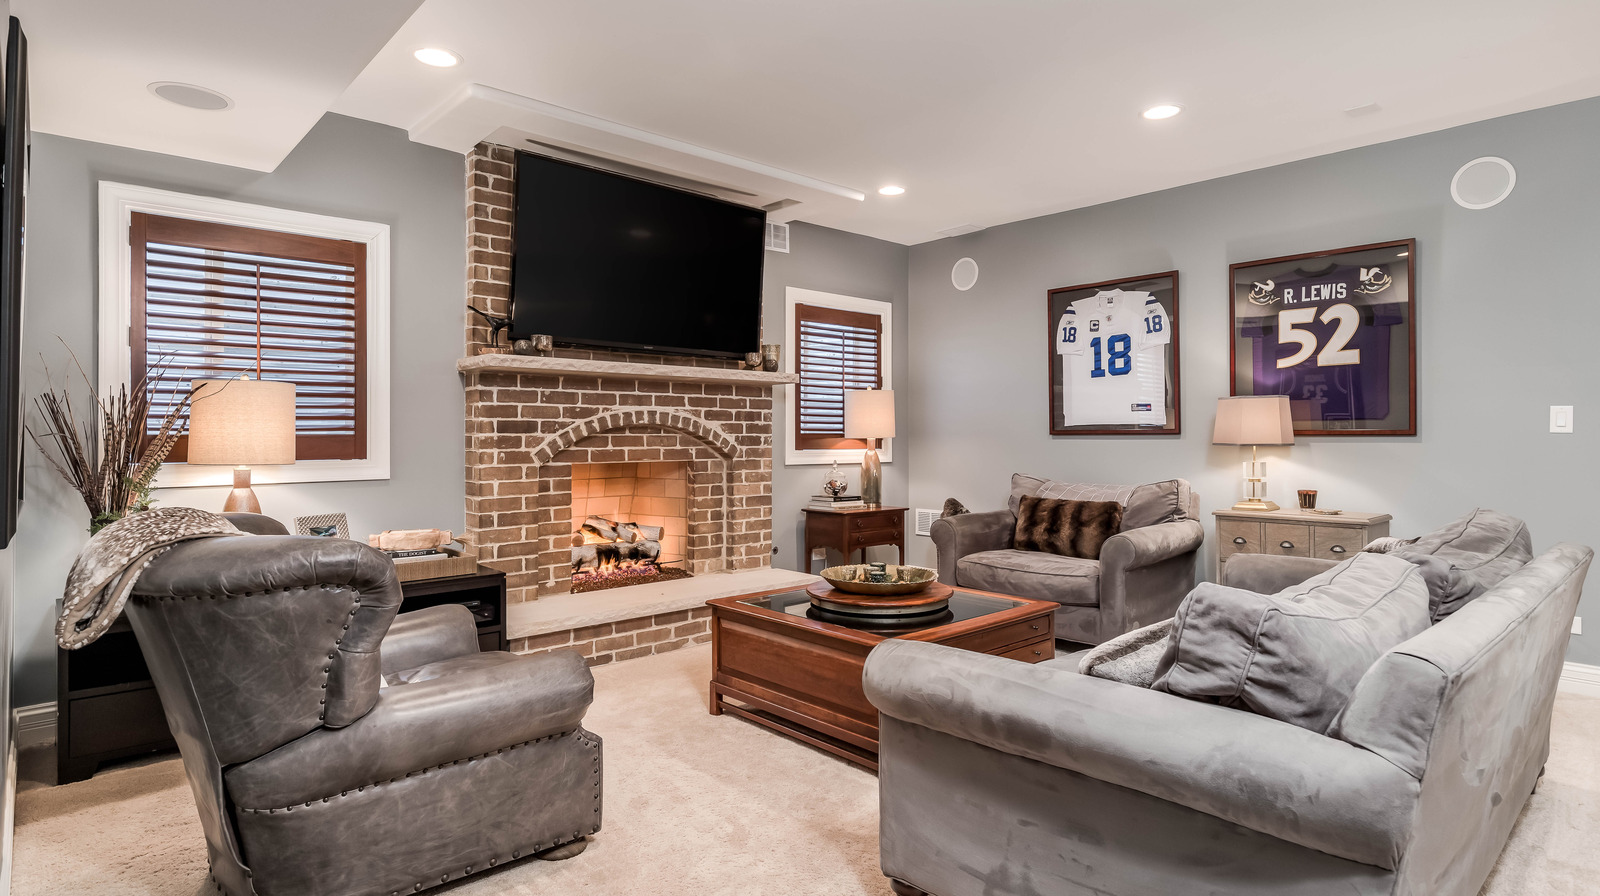 https://www.housedigest.com/img/gallery/10-genius-tips-for-placing-your-tv-over-a-fireplace/l-intro-1635257181.jpg